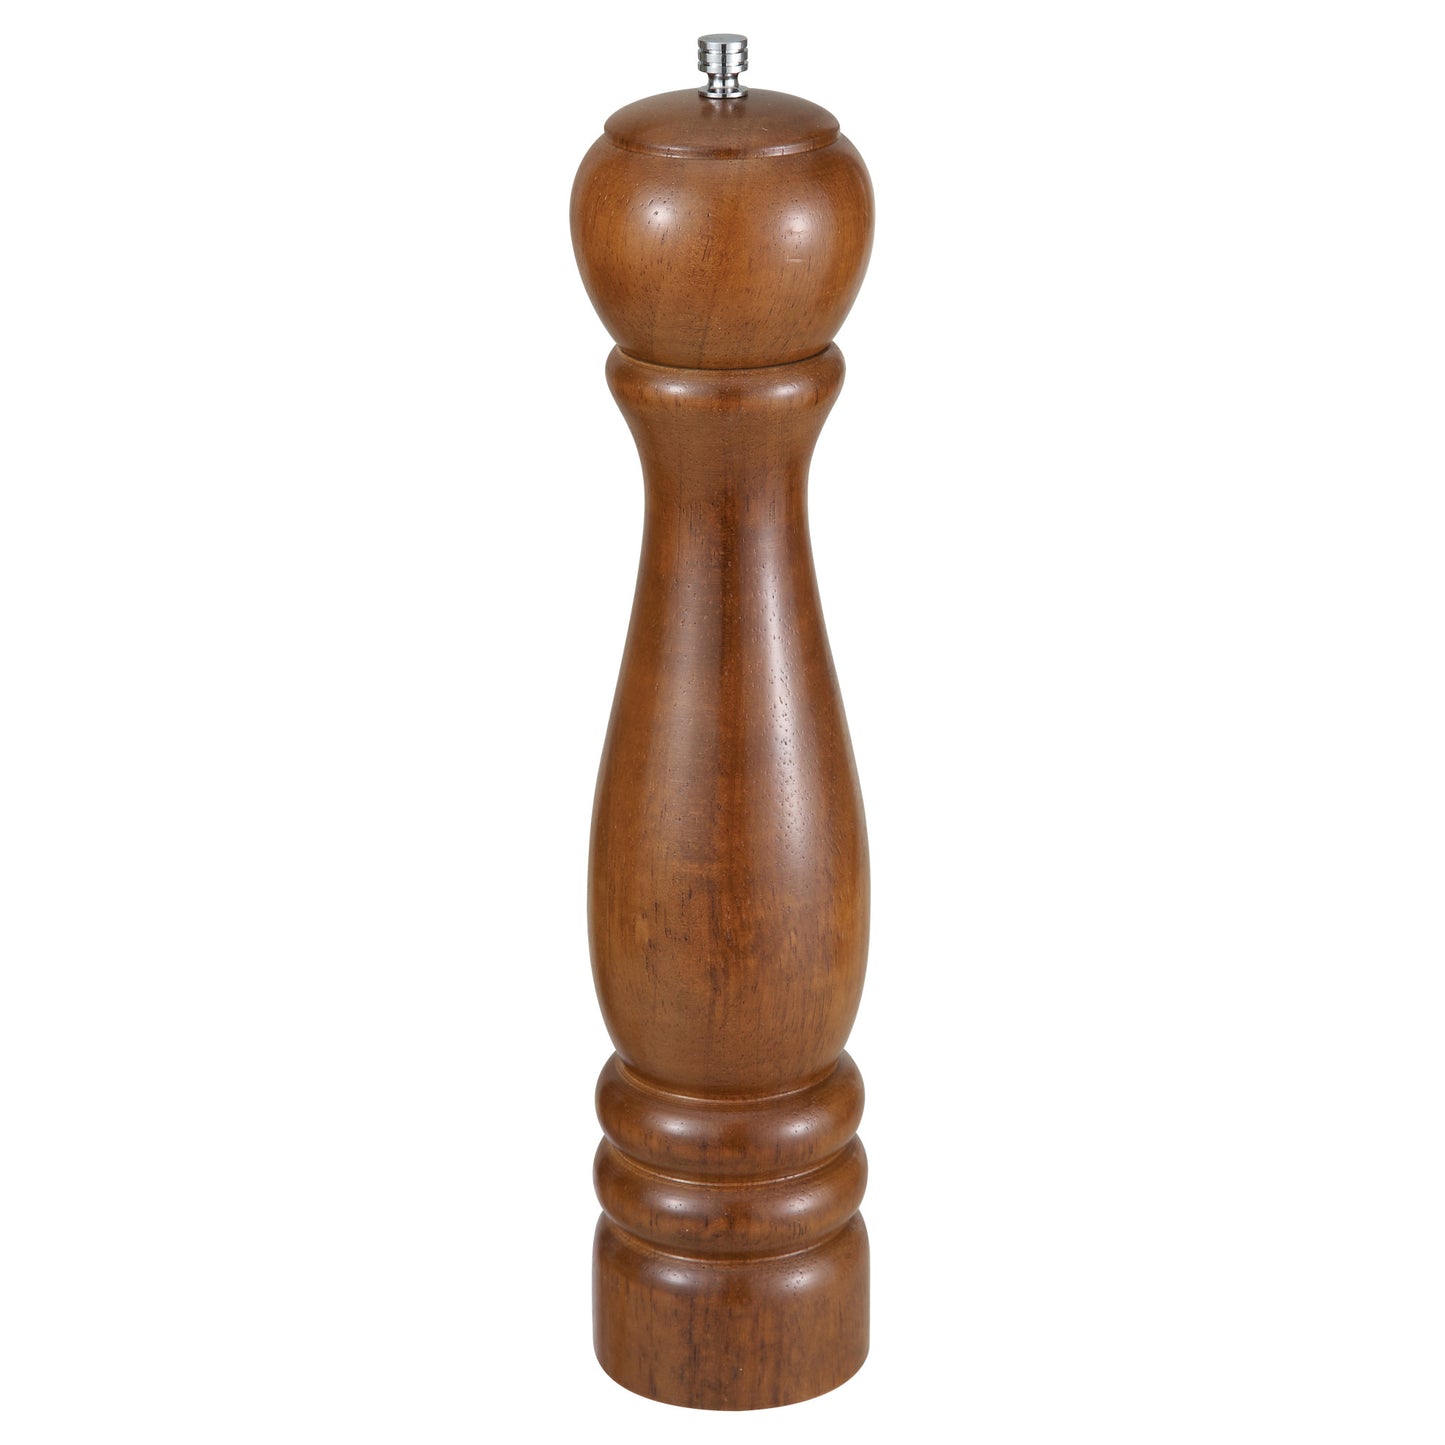 WPM-12 - 12" Peppermill, Russet Brown Wood